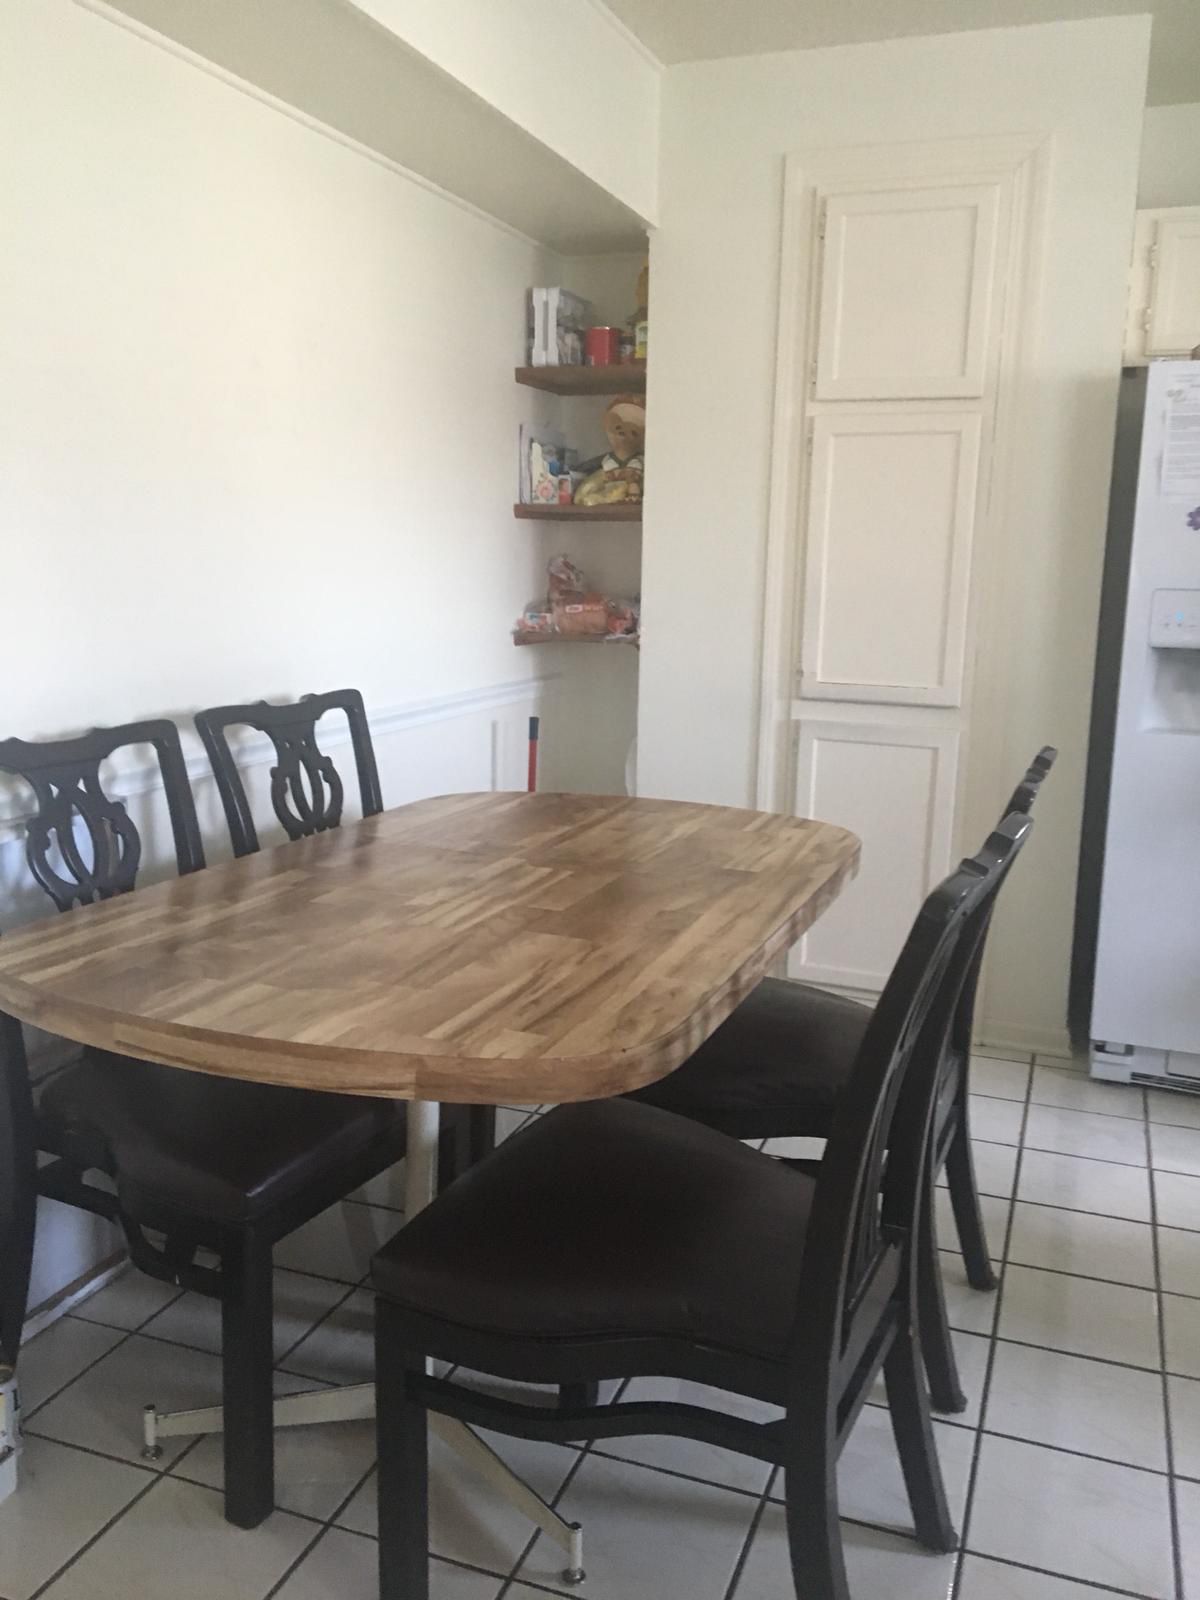 Kitchen Table With 6 Chairs, Chairs do have a few small rips